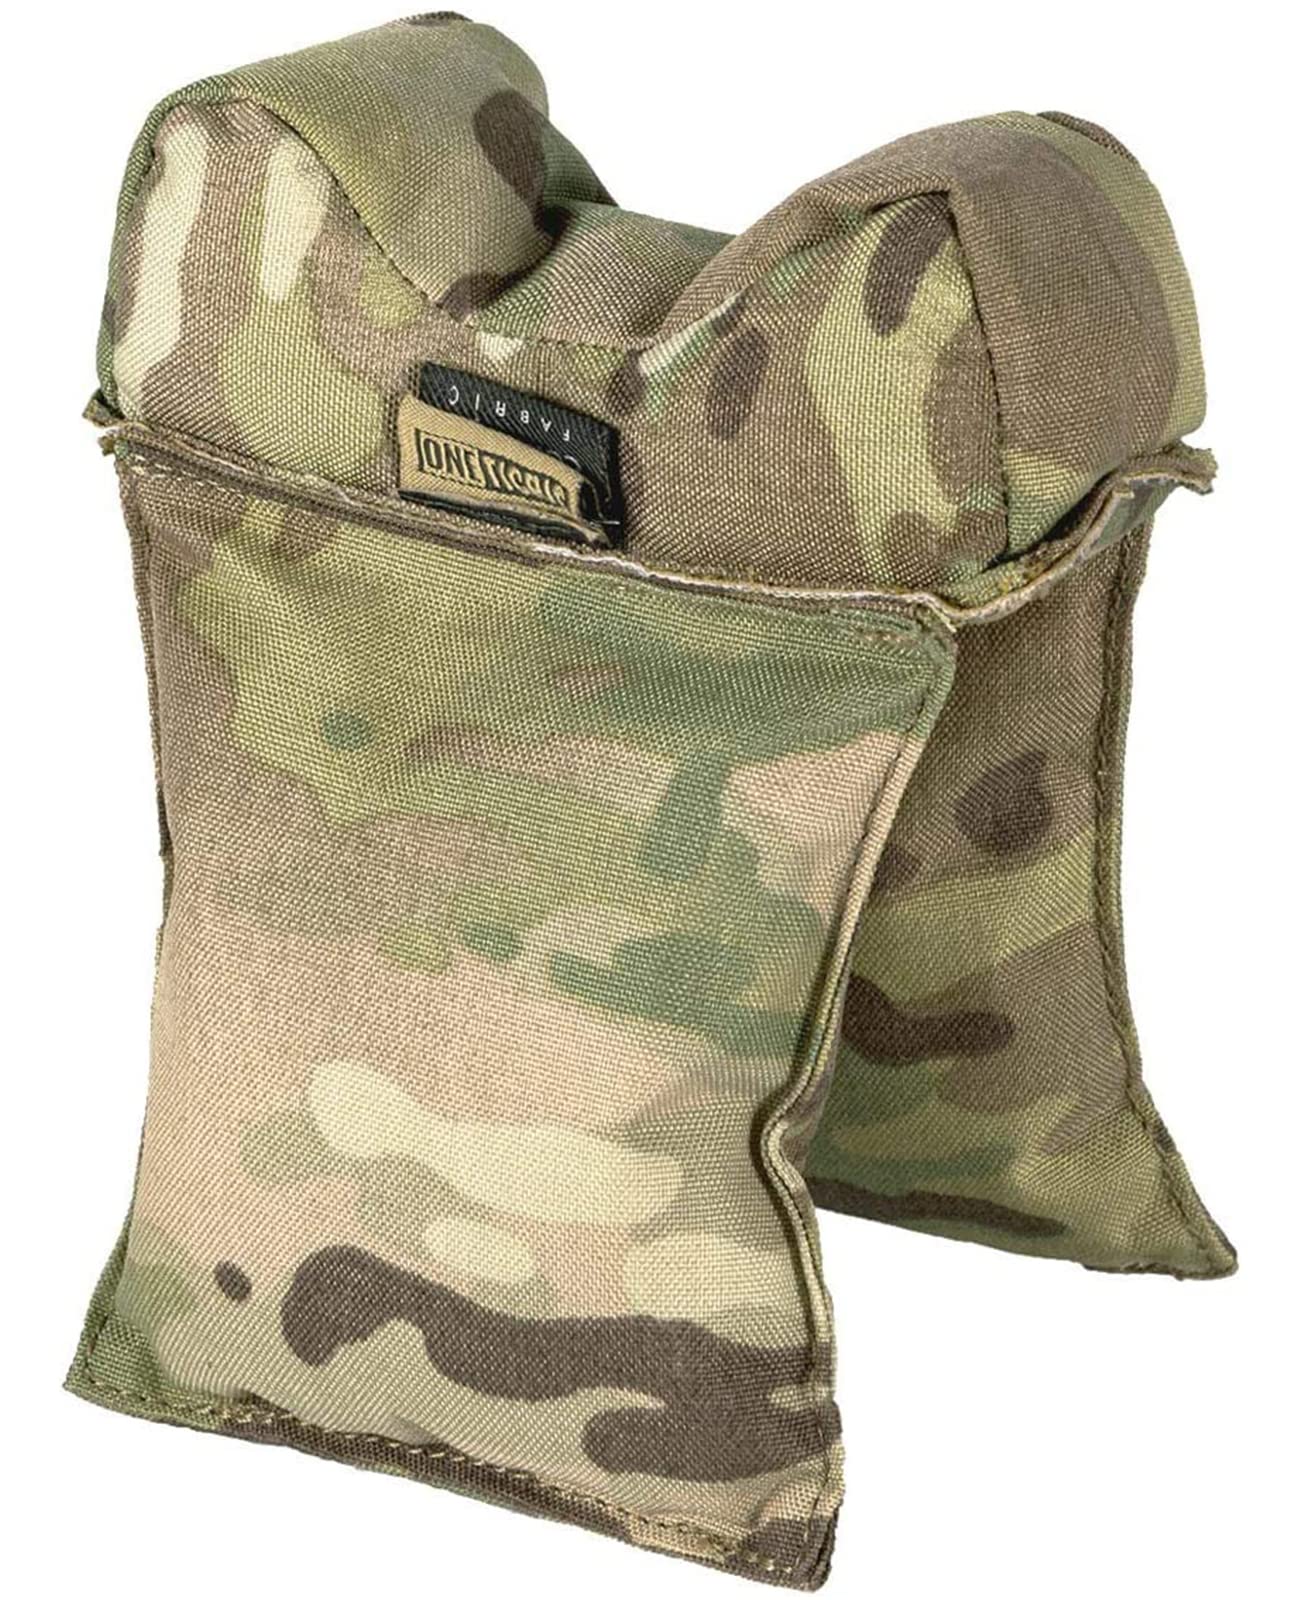 Amazon.com : Allen Company Unfilled Front & Rear Shooting Bag Combo,  Tan/Black : Sports & Outdoors